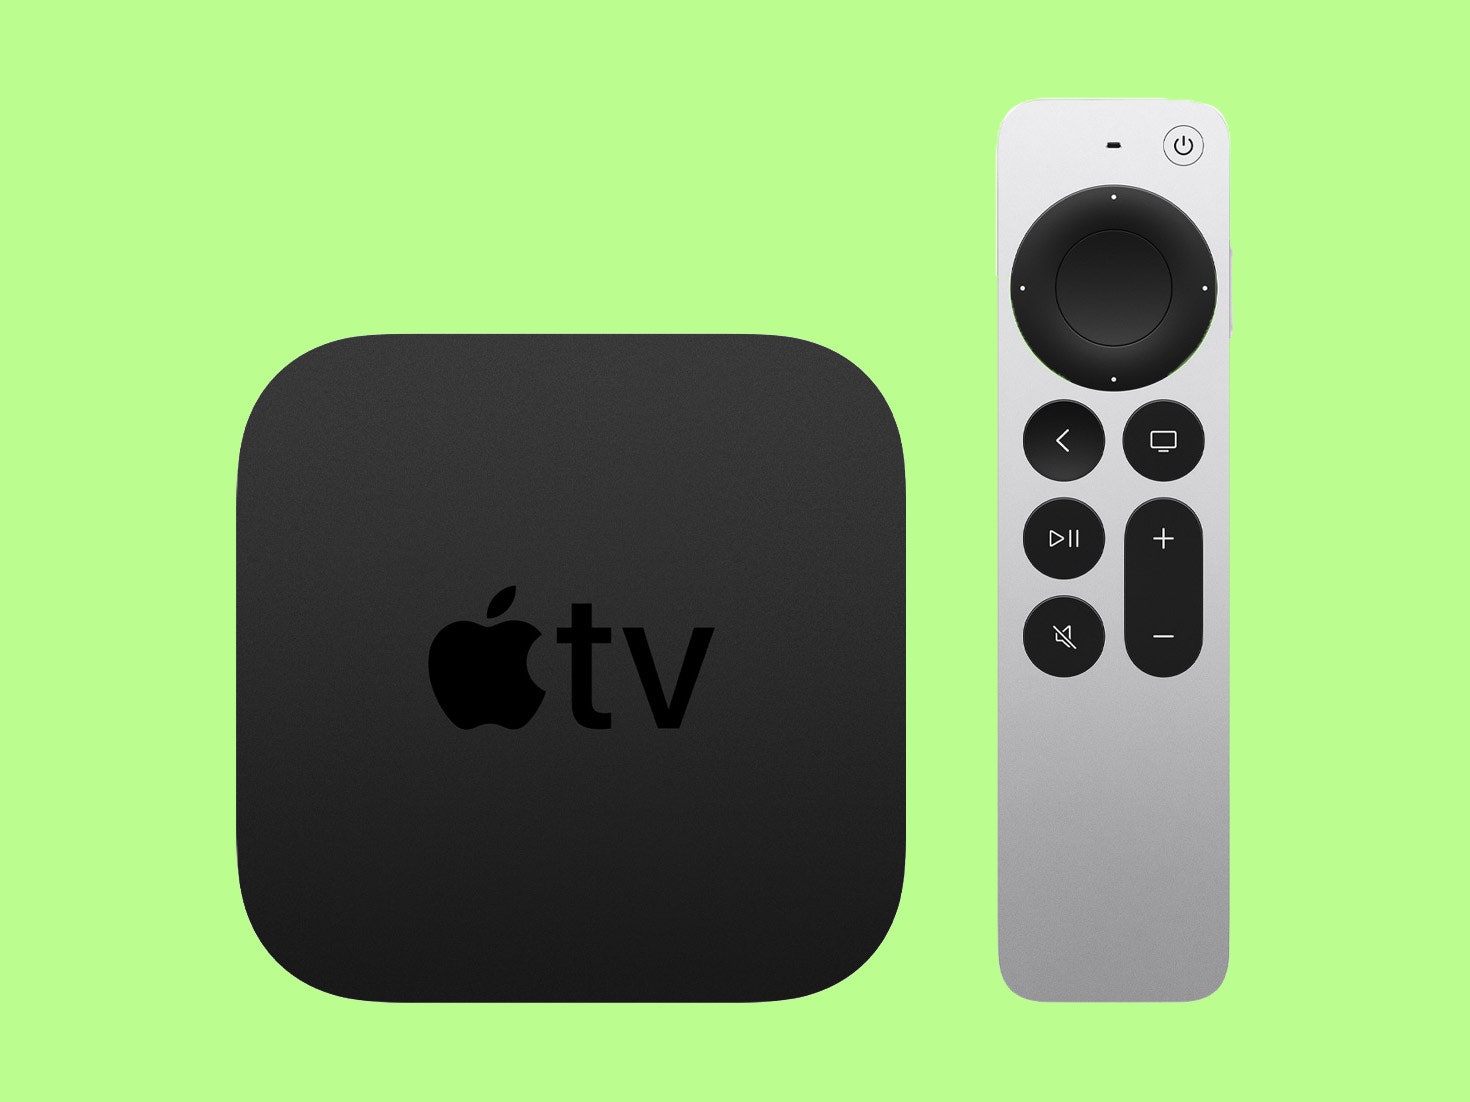 apple streaming box and remote